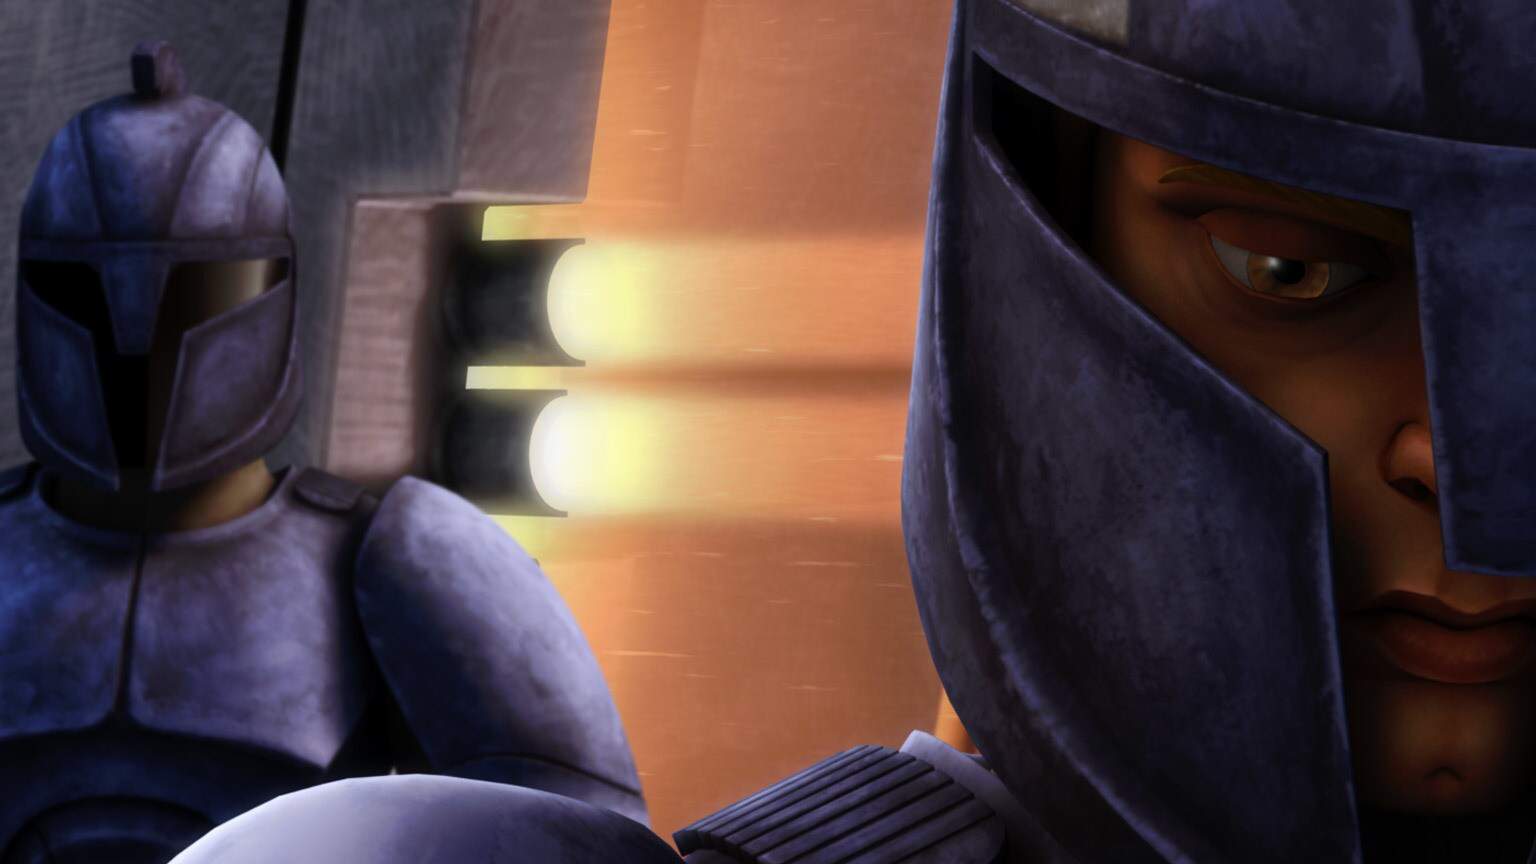 The Clone Wars Rewatch: The Shroud of the Dark Side and the "Cloak of Darkness"